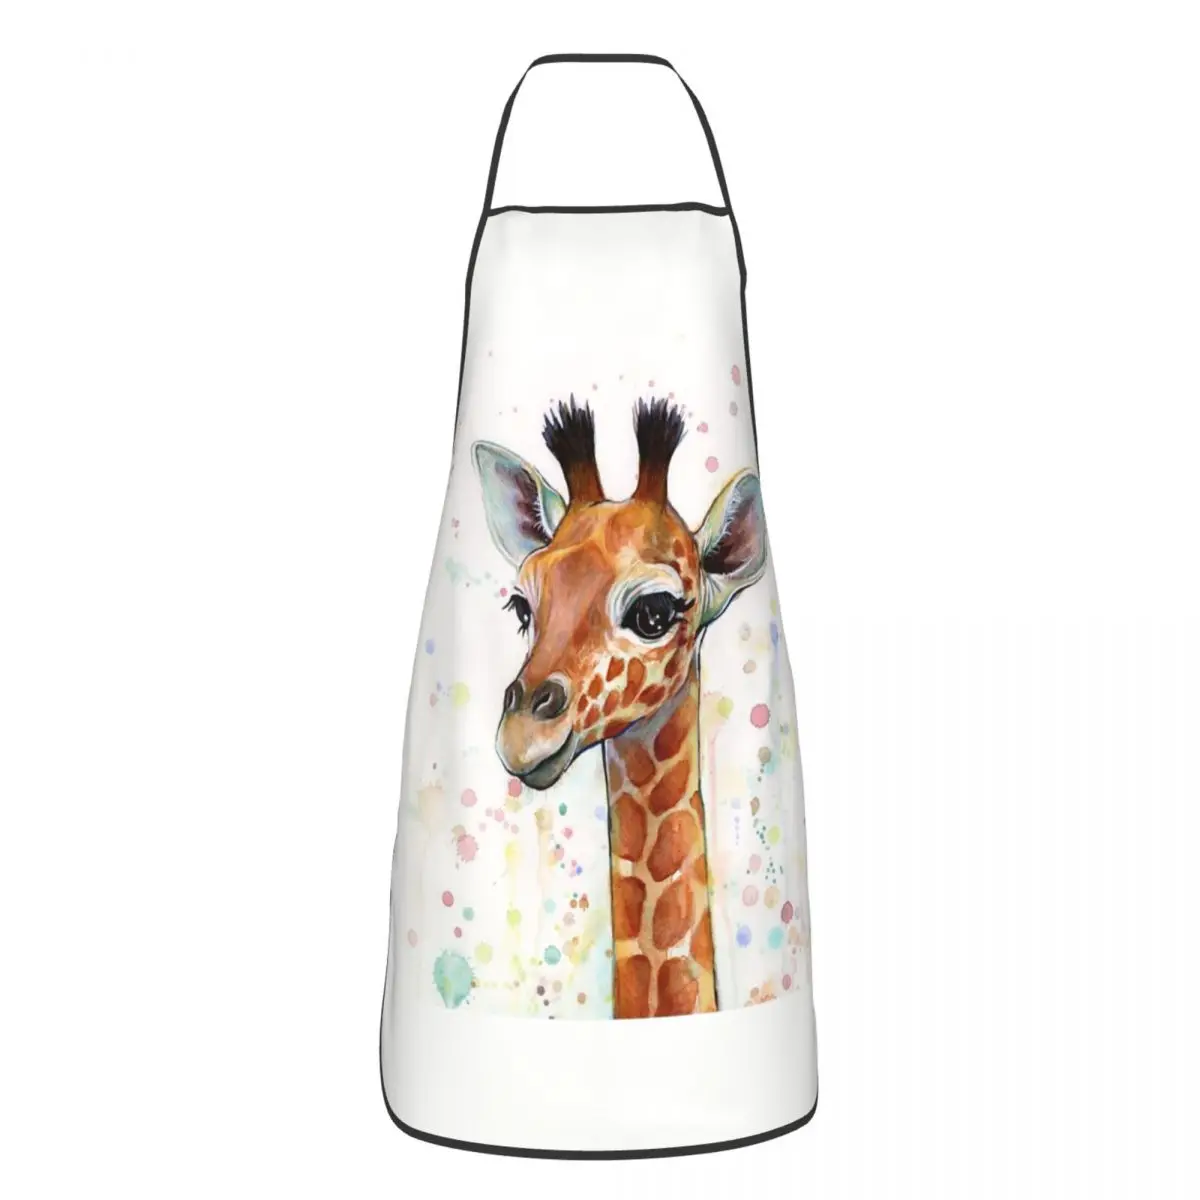 

Baby Giraffe Nursery Art Kitchen Cuisine Aprons Antifouling Pinafore for Adult Chef Cooking Home Cleaning